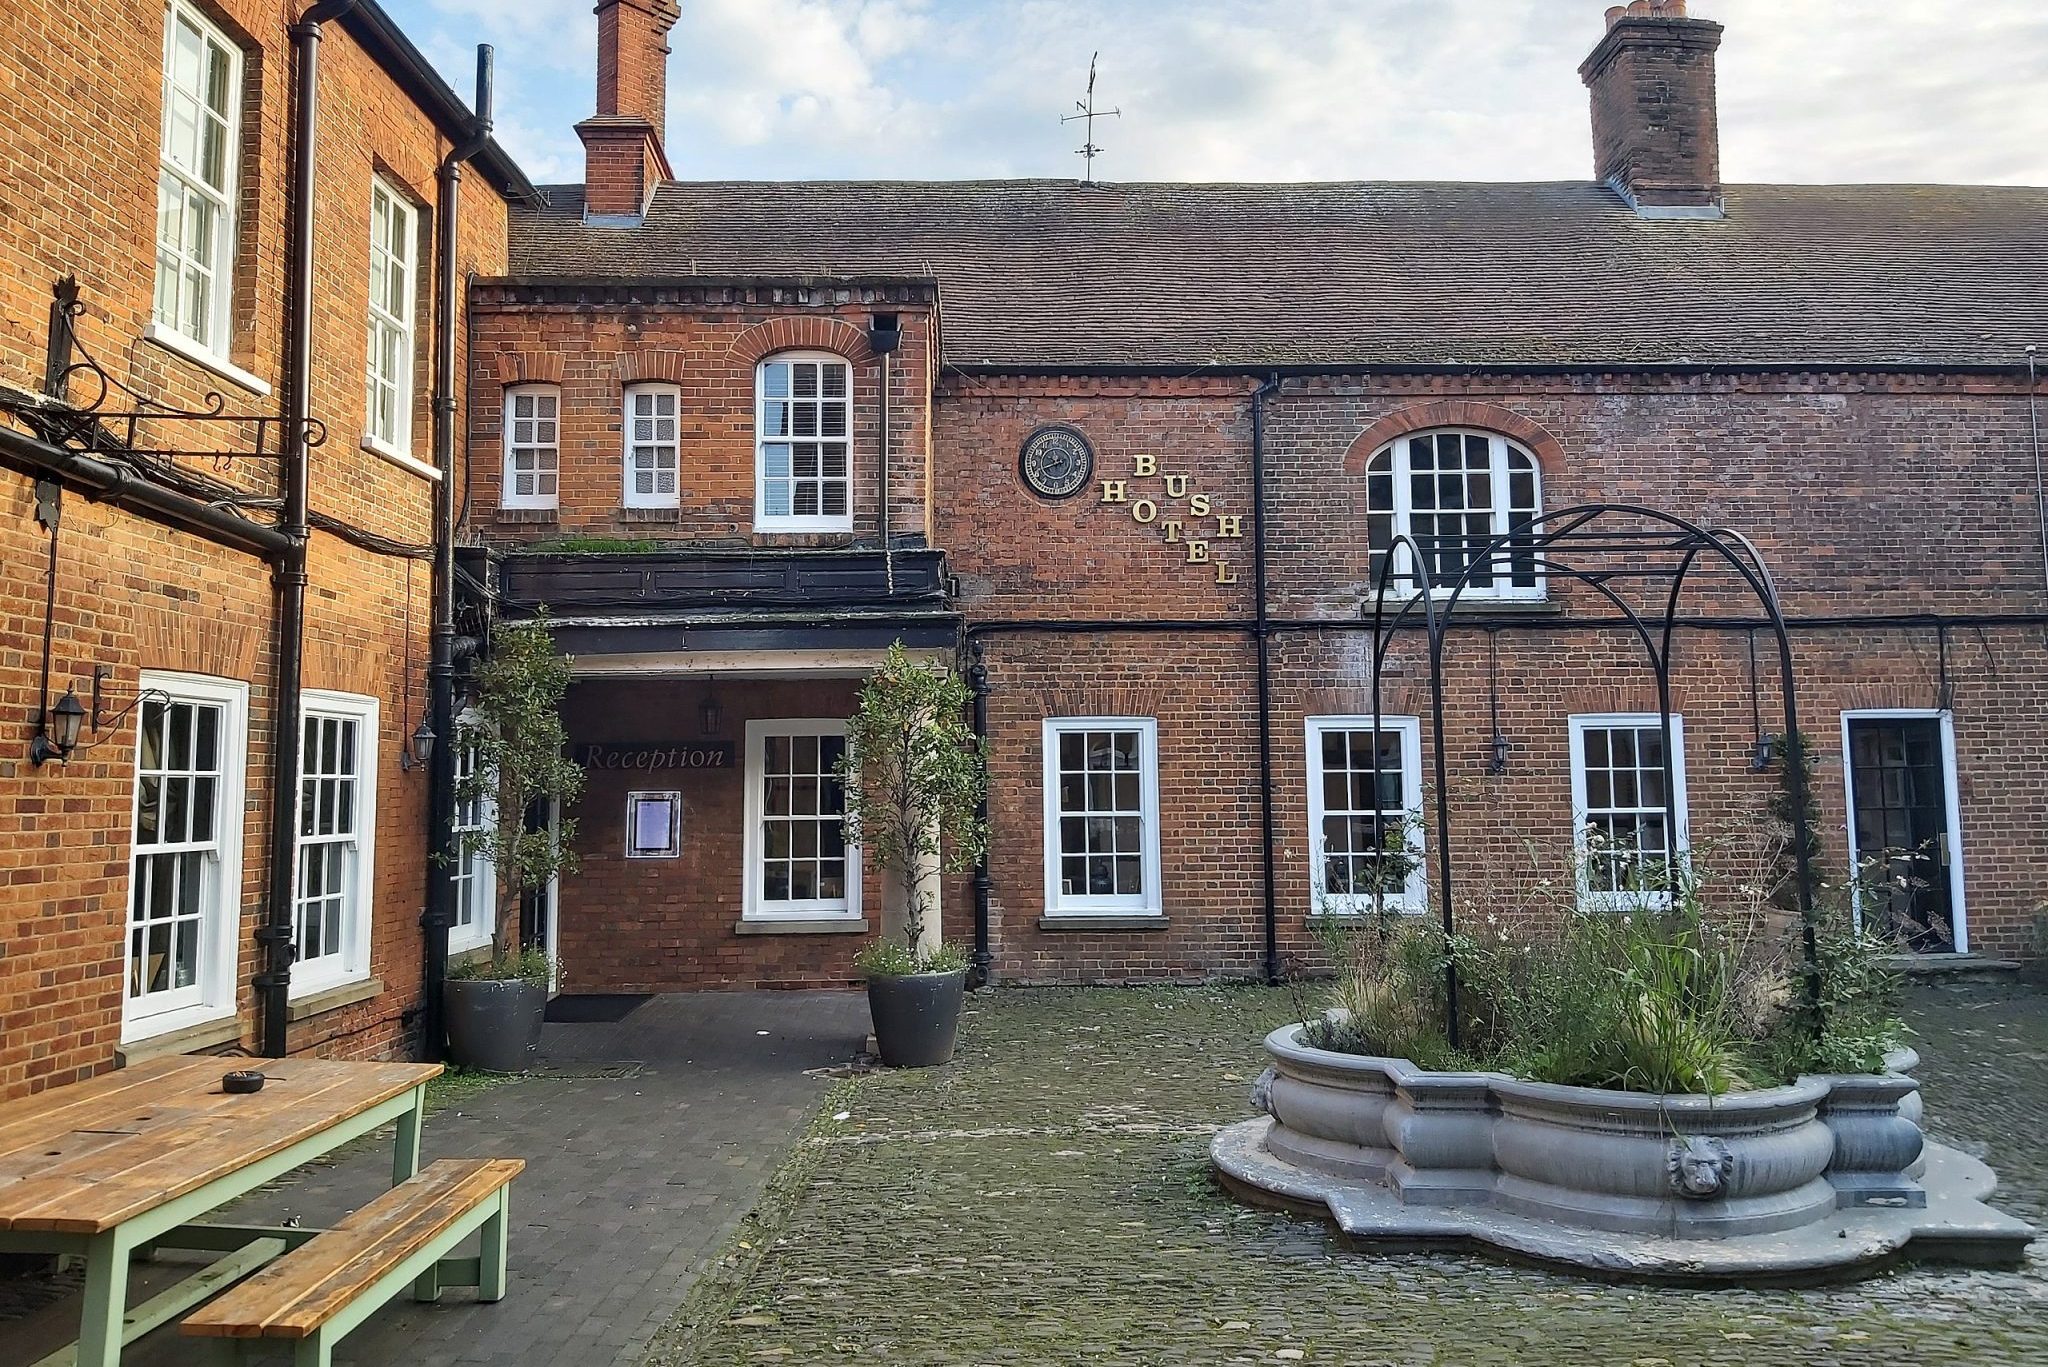 Bush Hotel Farnham (pictured) in the southern U.K. is a client of Mews. 